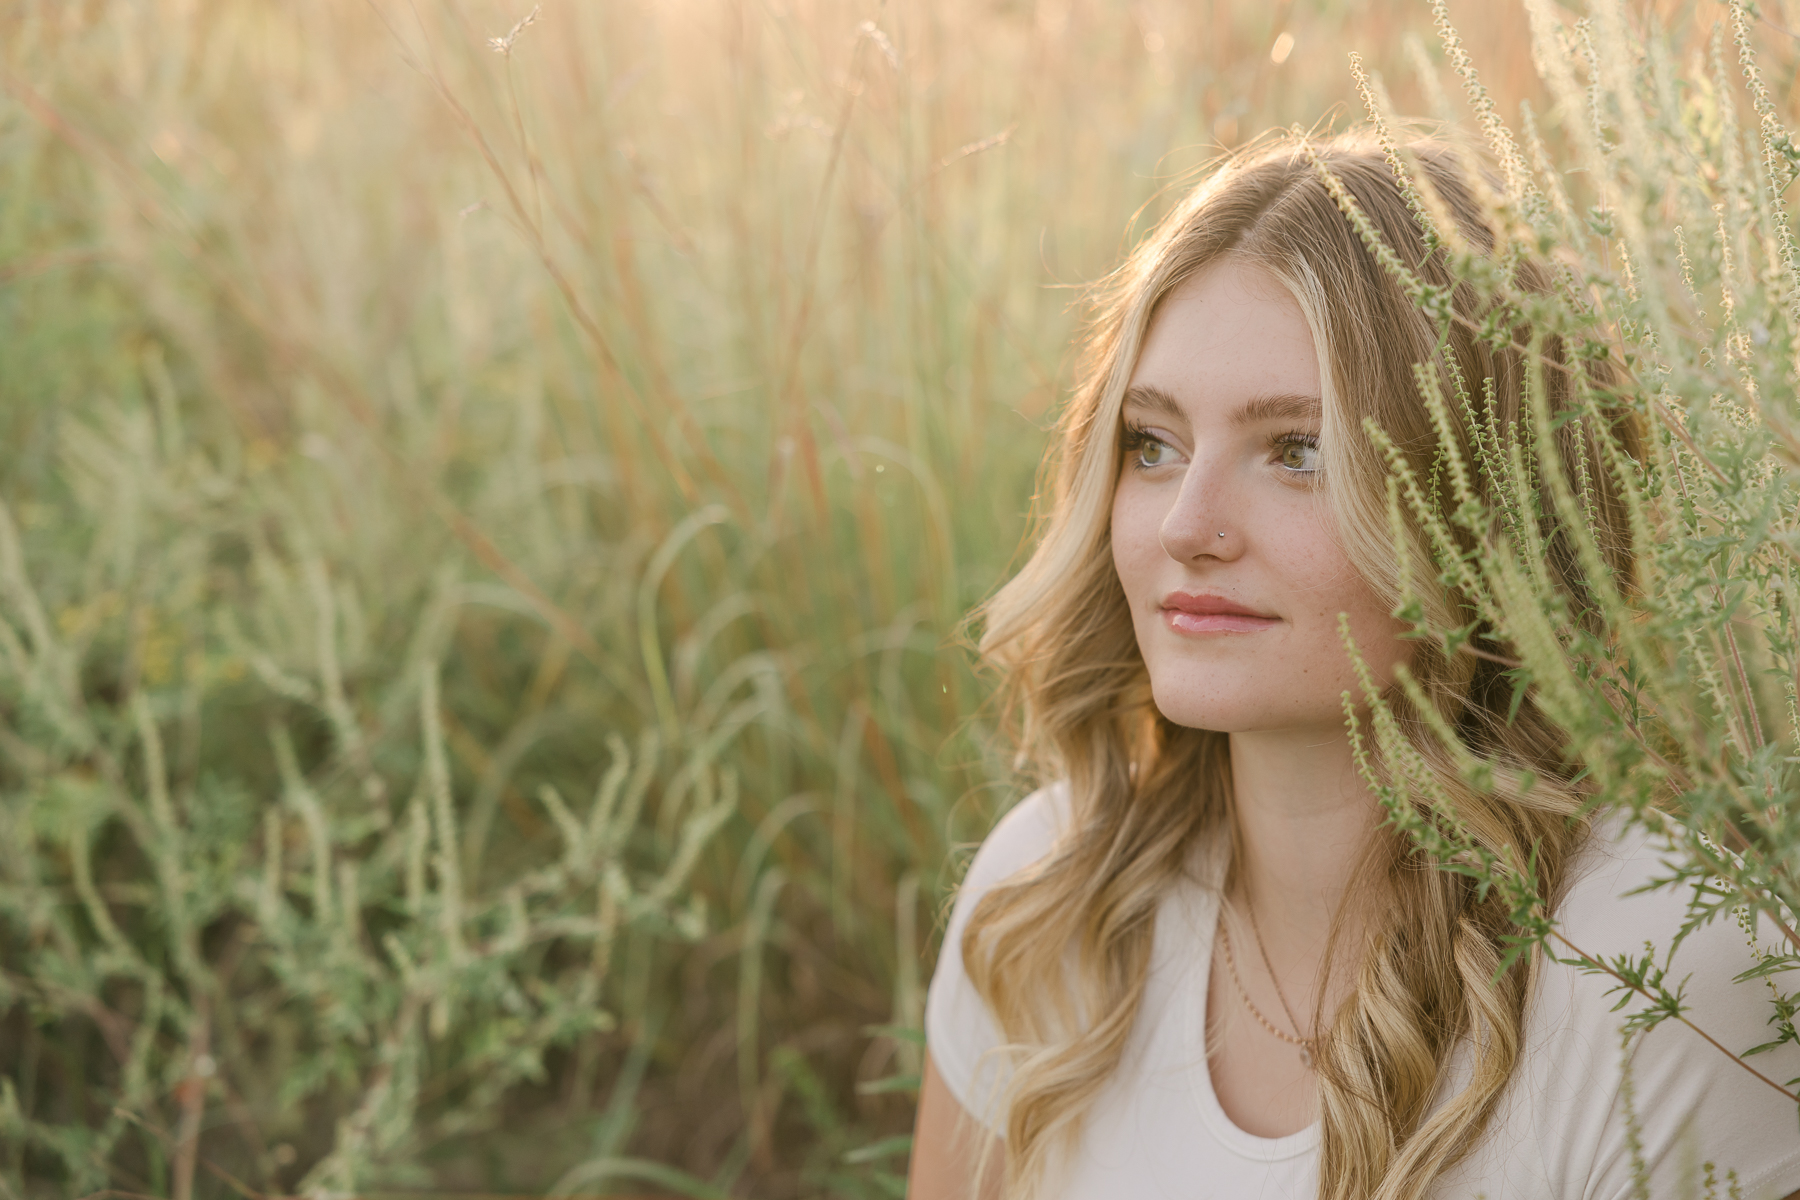 Girl sits in field of tall grass and looks forward in a white top, Indianapolis senior photographer